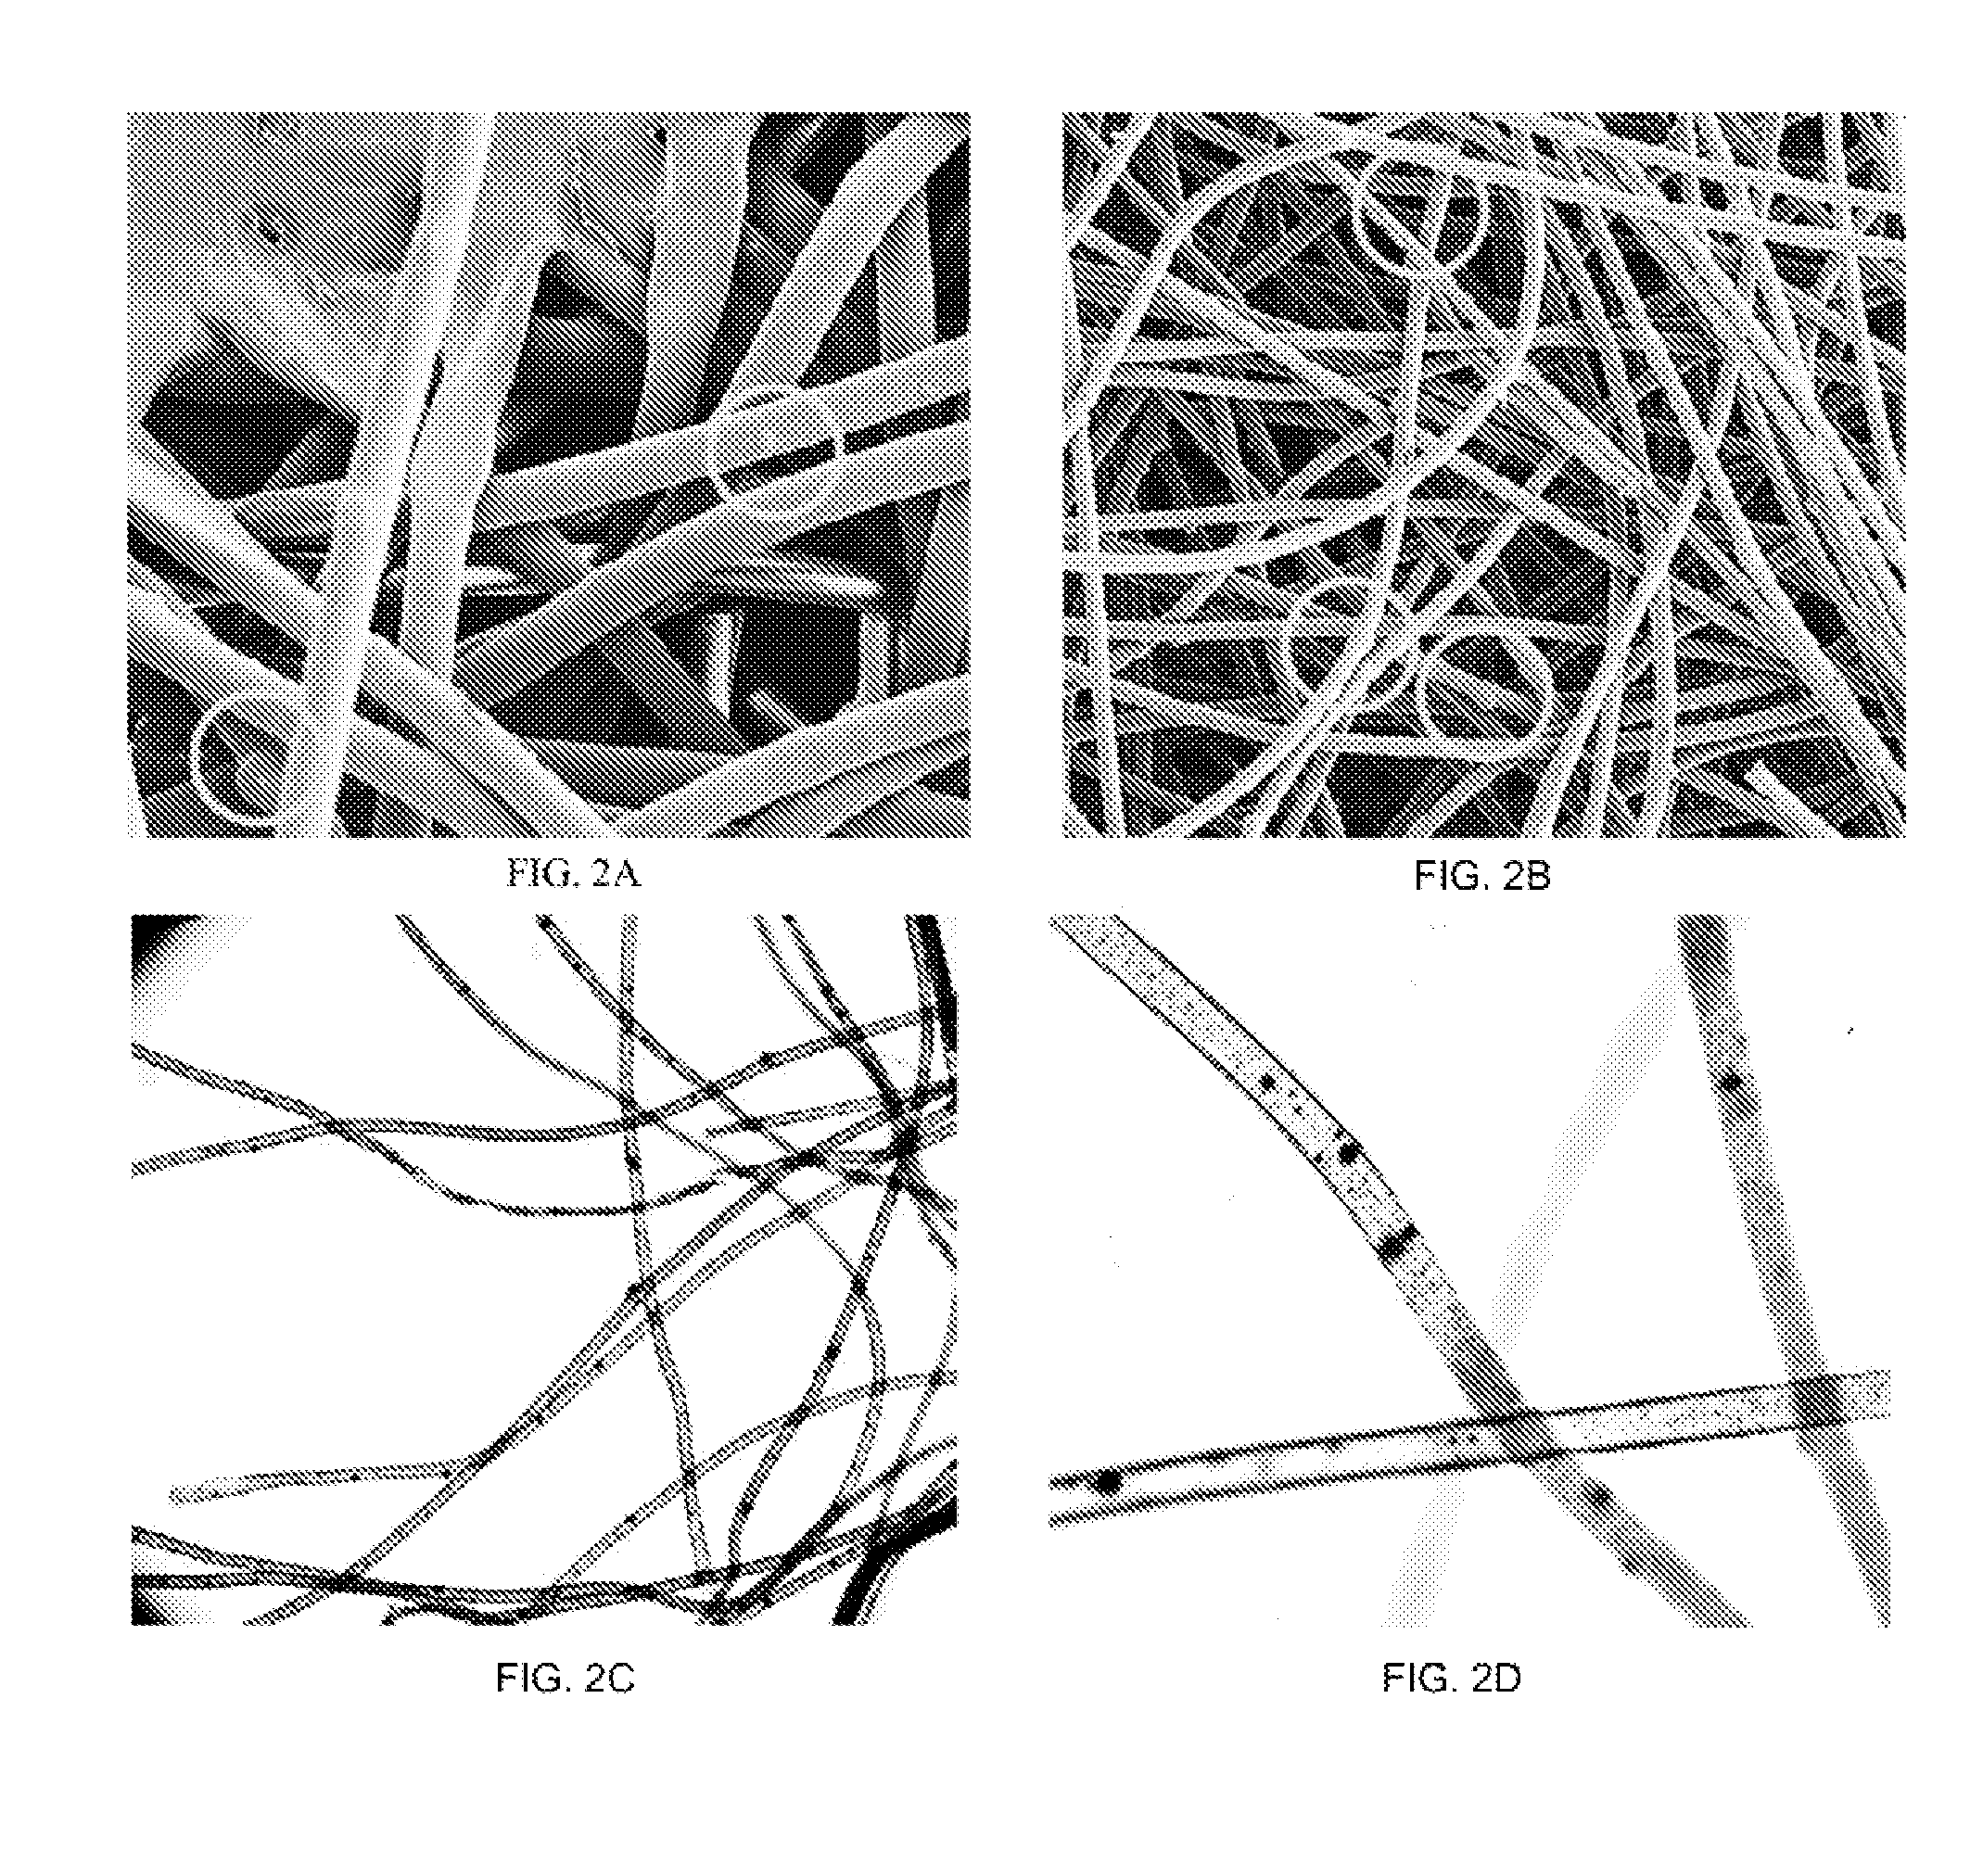 Metal detectable fiber and articles formed from the same